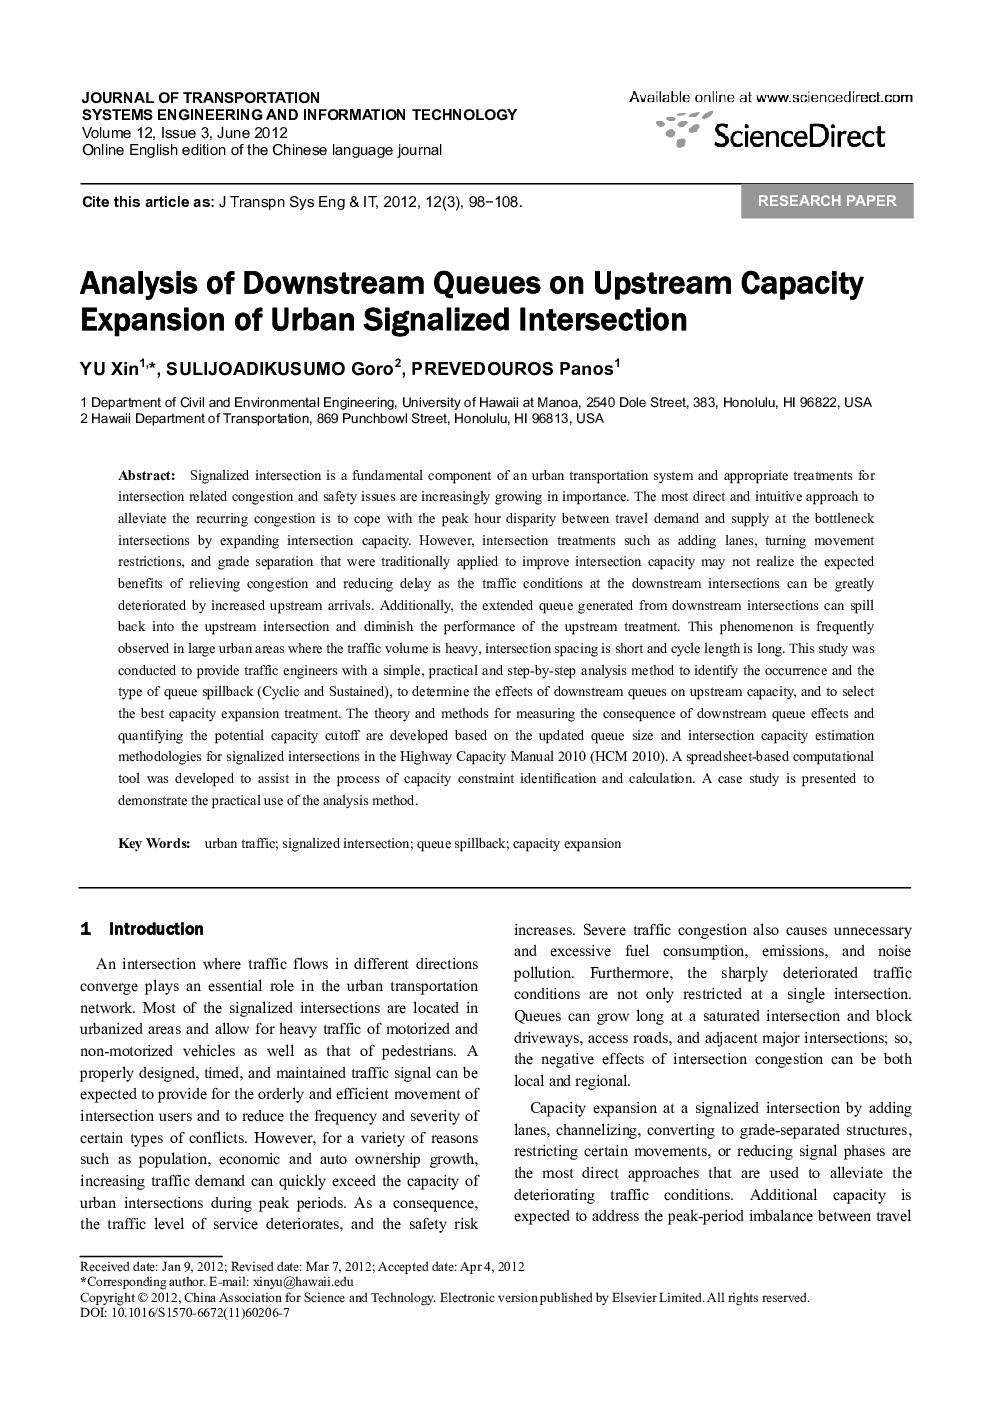 Analysis of Downstream Queues on Upstream Capacity Expansion of Urban Signalized Intersection